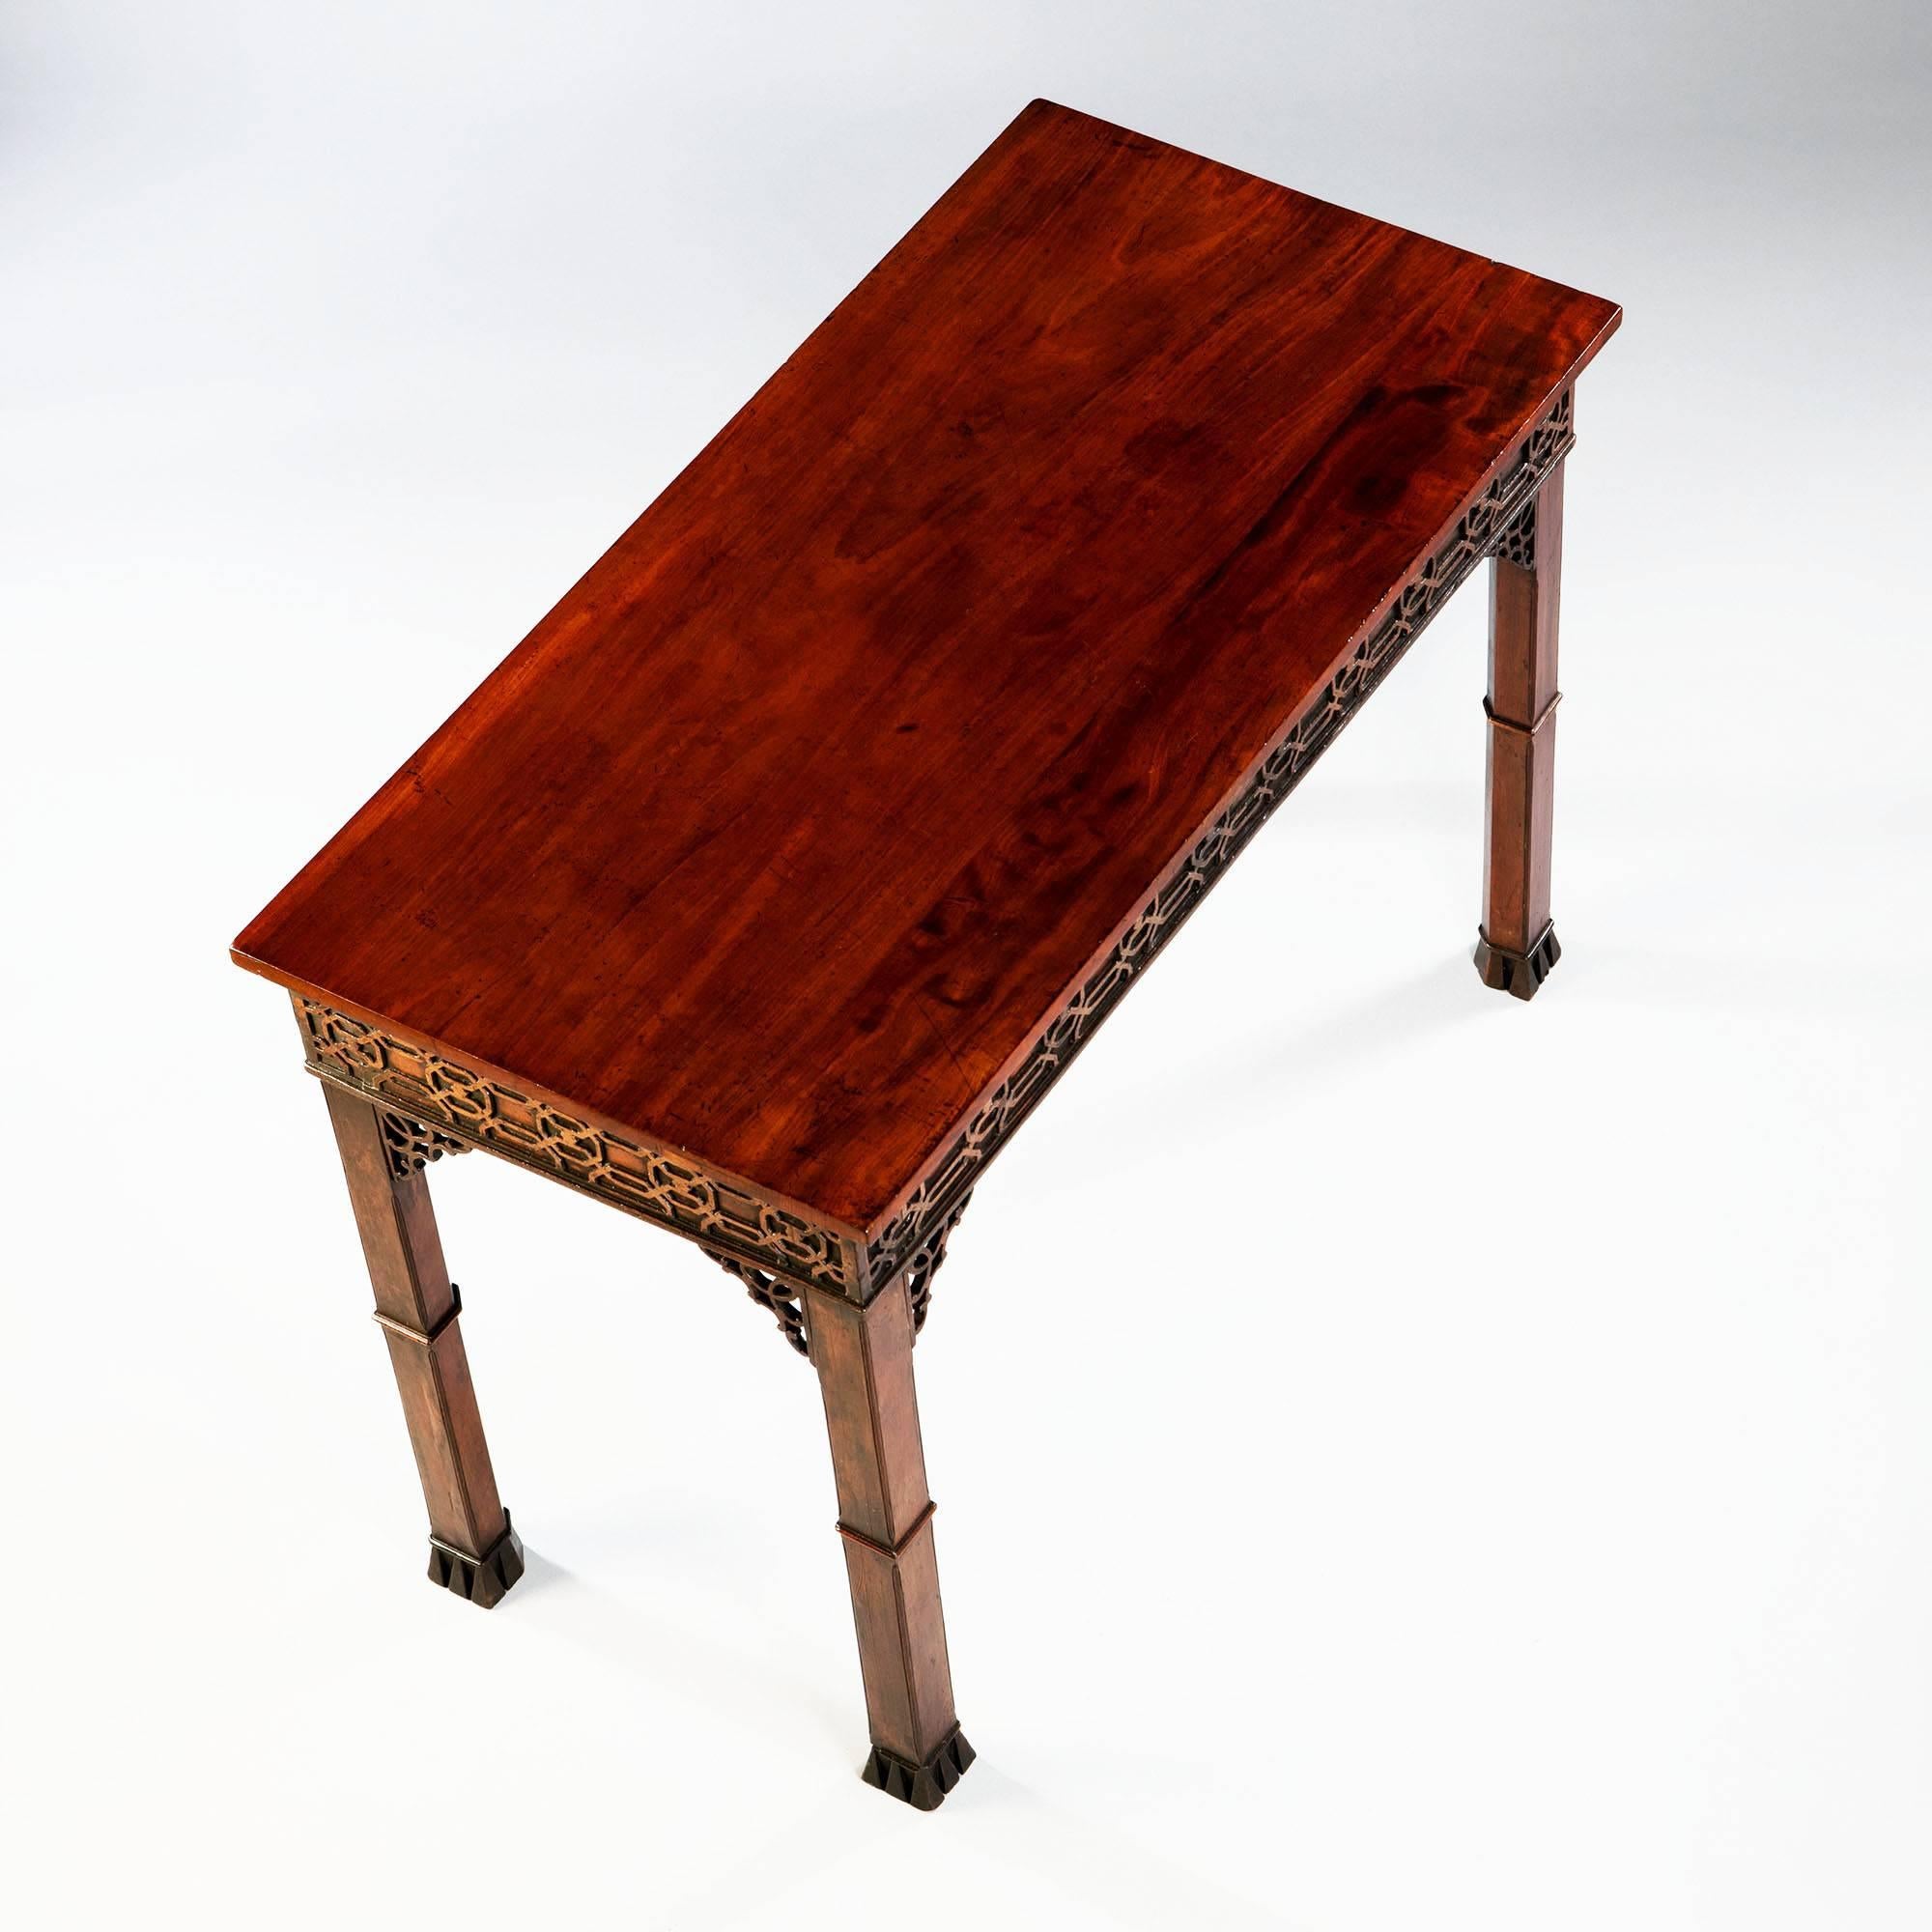 Mahogany Georgian 18th Century Chippendale Centre or Serving Table